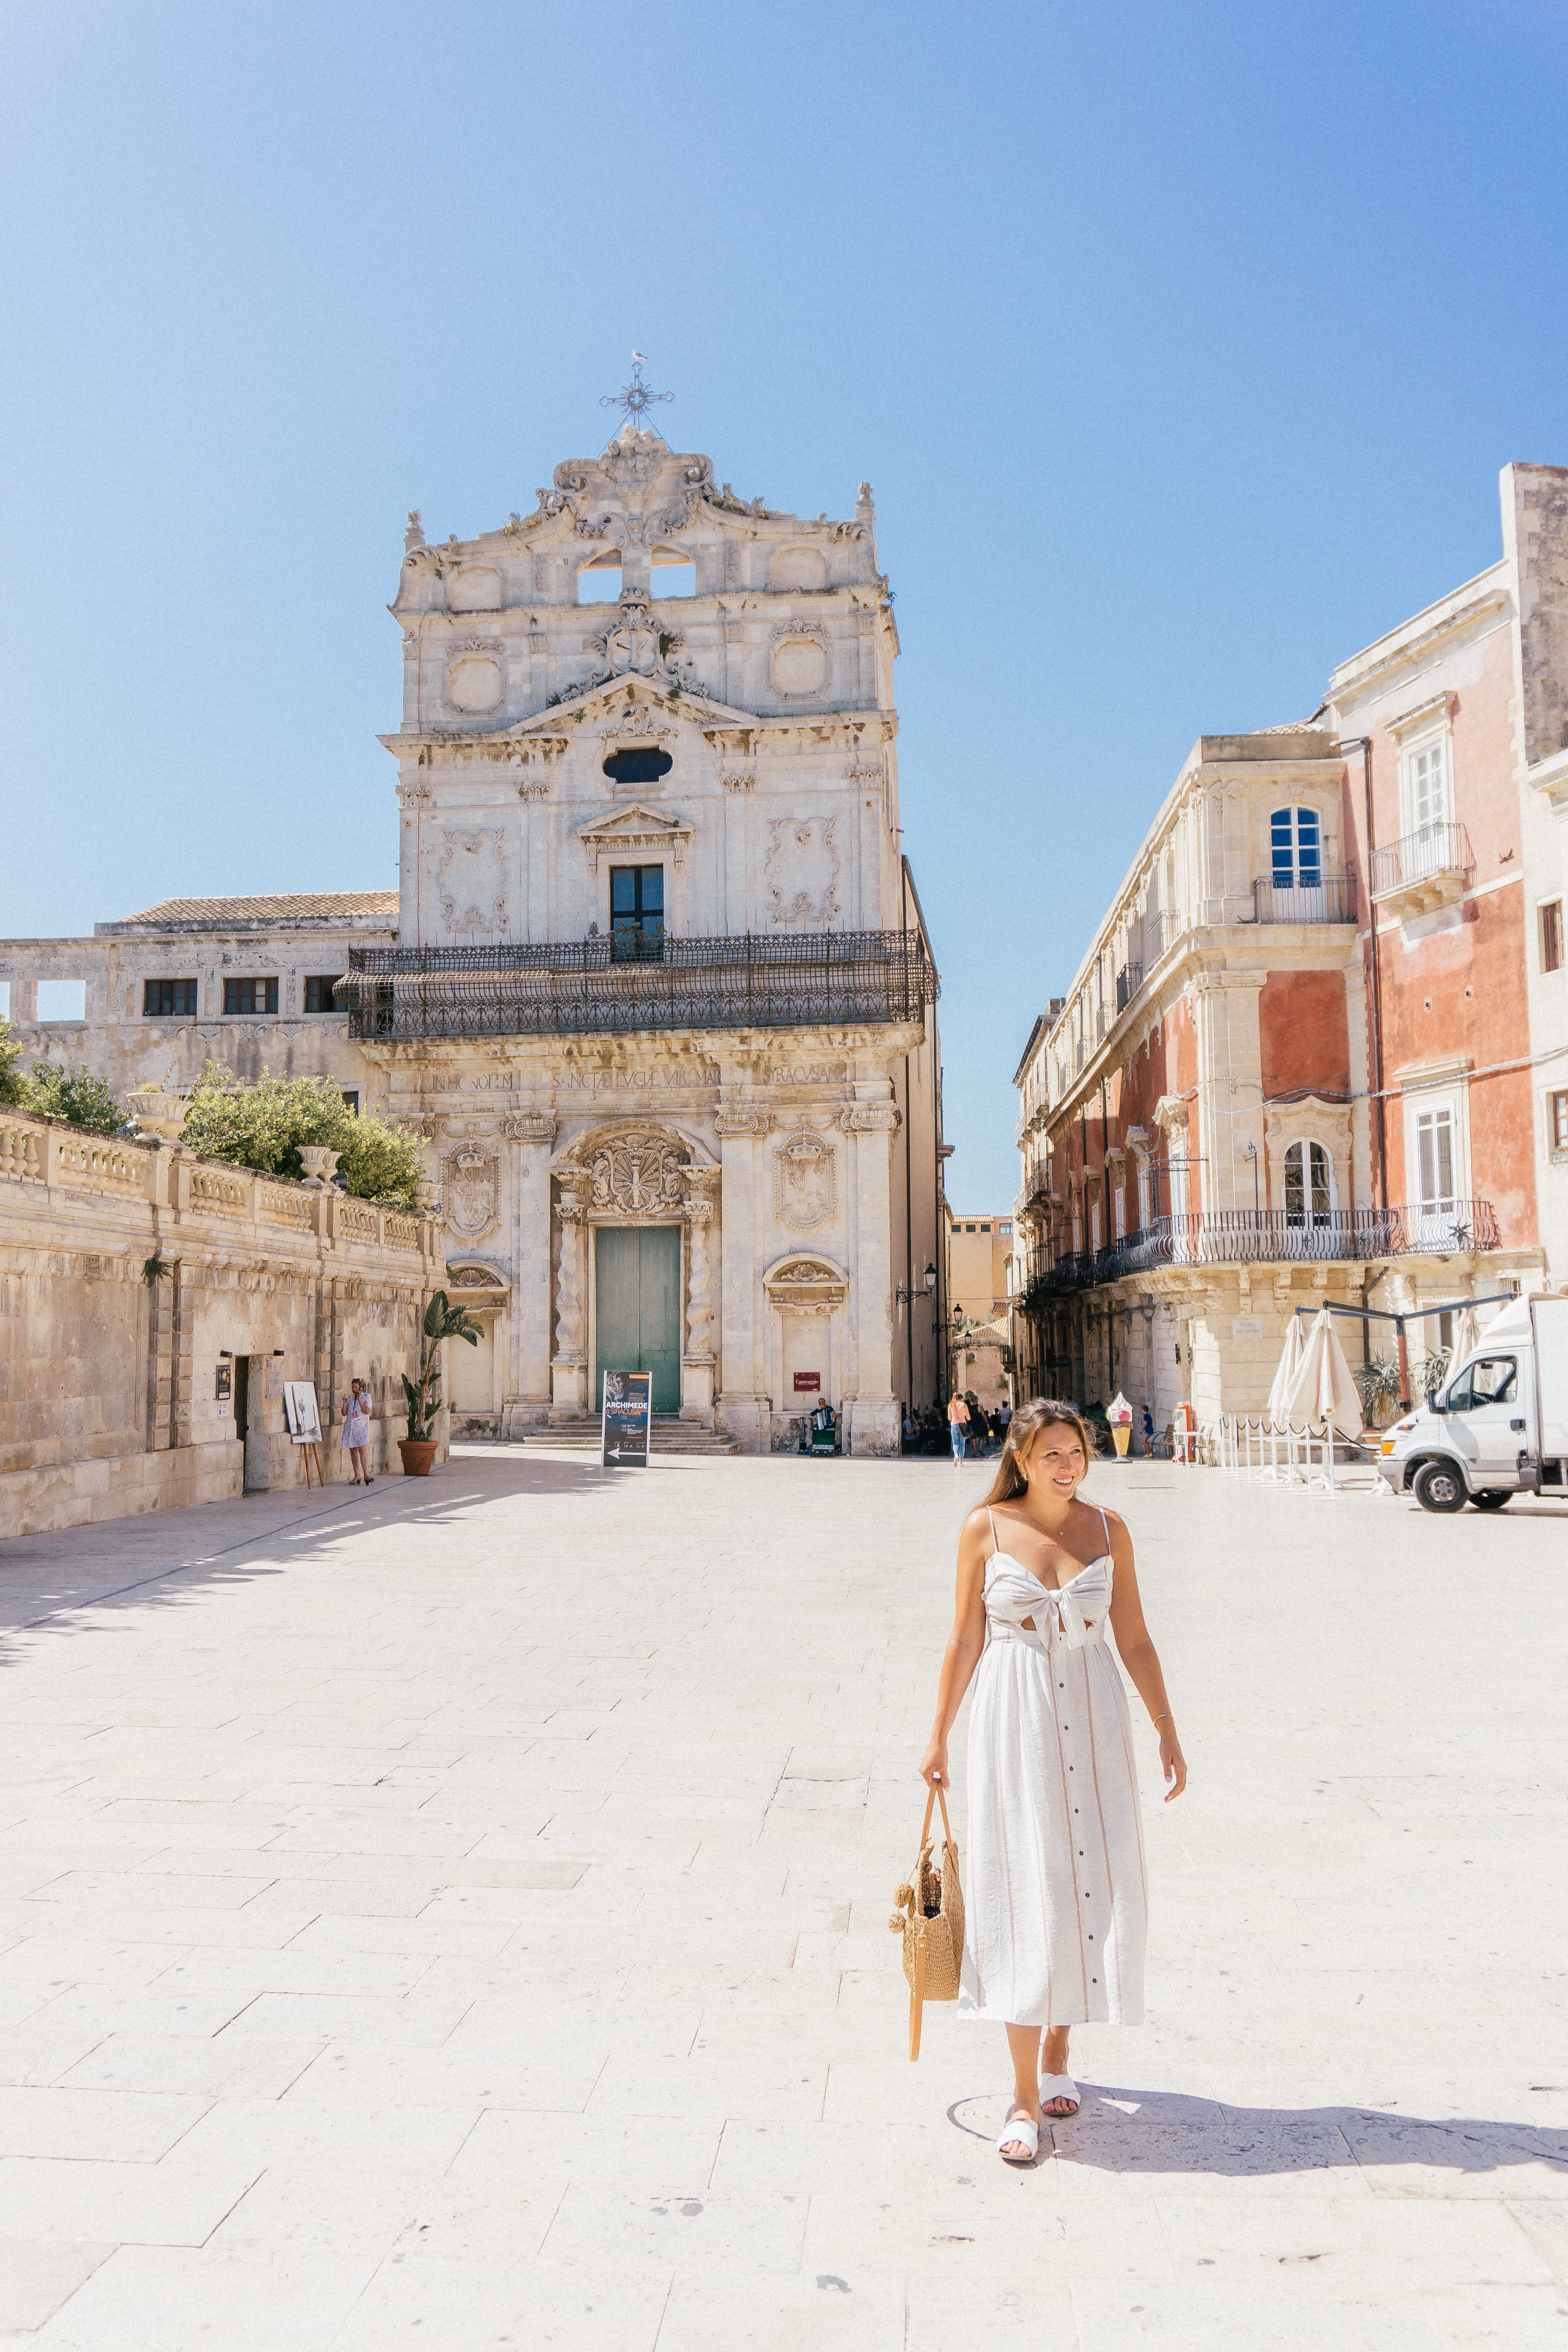 A girl walking through the stunning seaside town of Oritgia - just one of the top stops on this 7-day Sicily Itinerary.